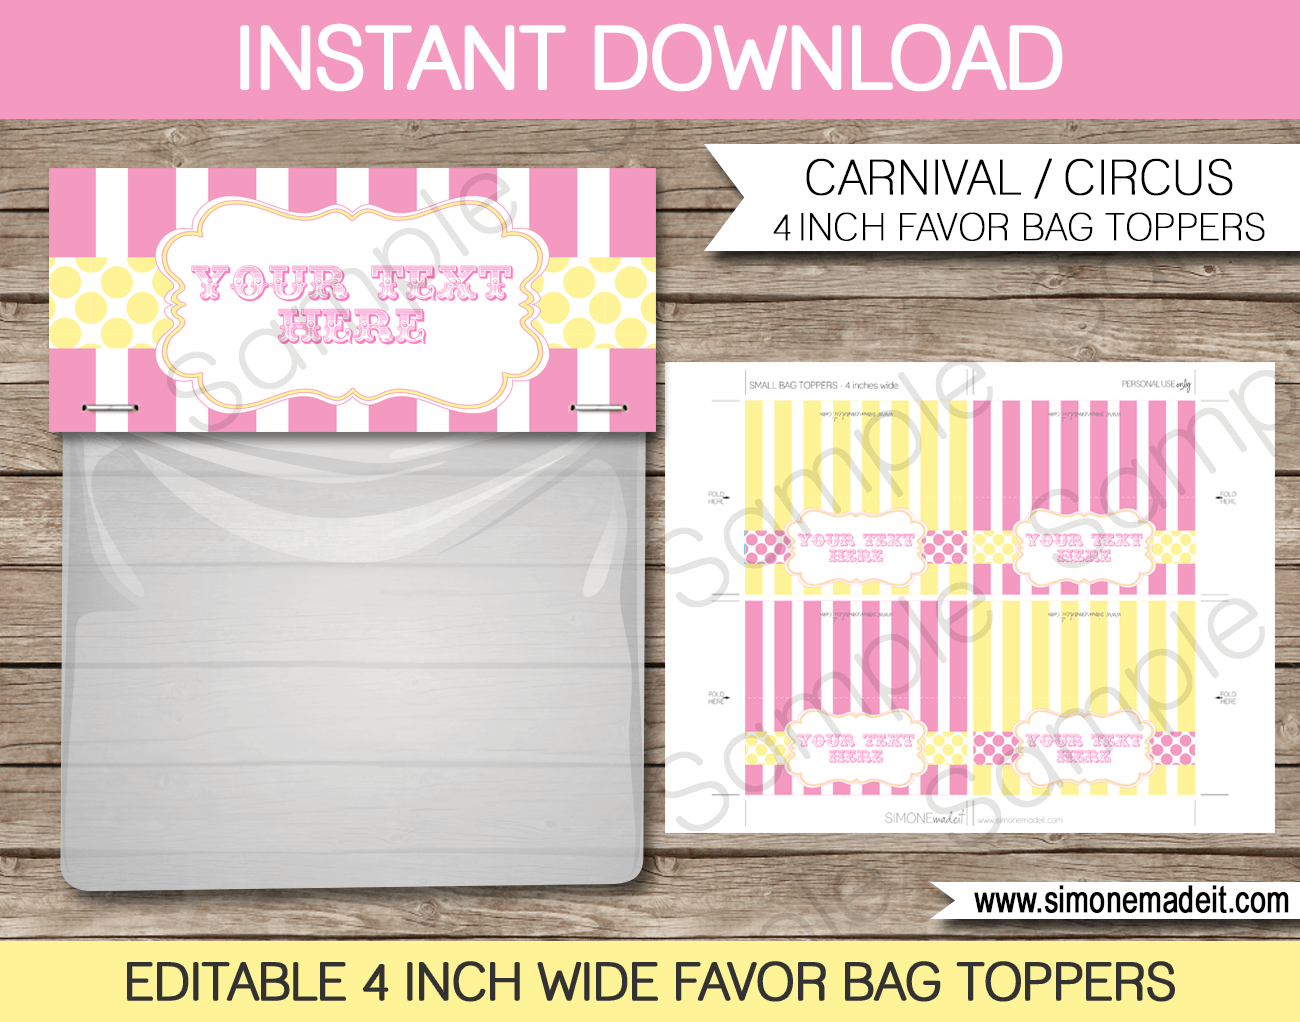 Pink & Yellow Editable Carnival Favor Bag Toppers | Circus or Carnival Party | Printable DIY Template | $3.00 INSTANT DOWNLOAD via SIMONEmadeit.com